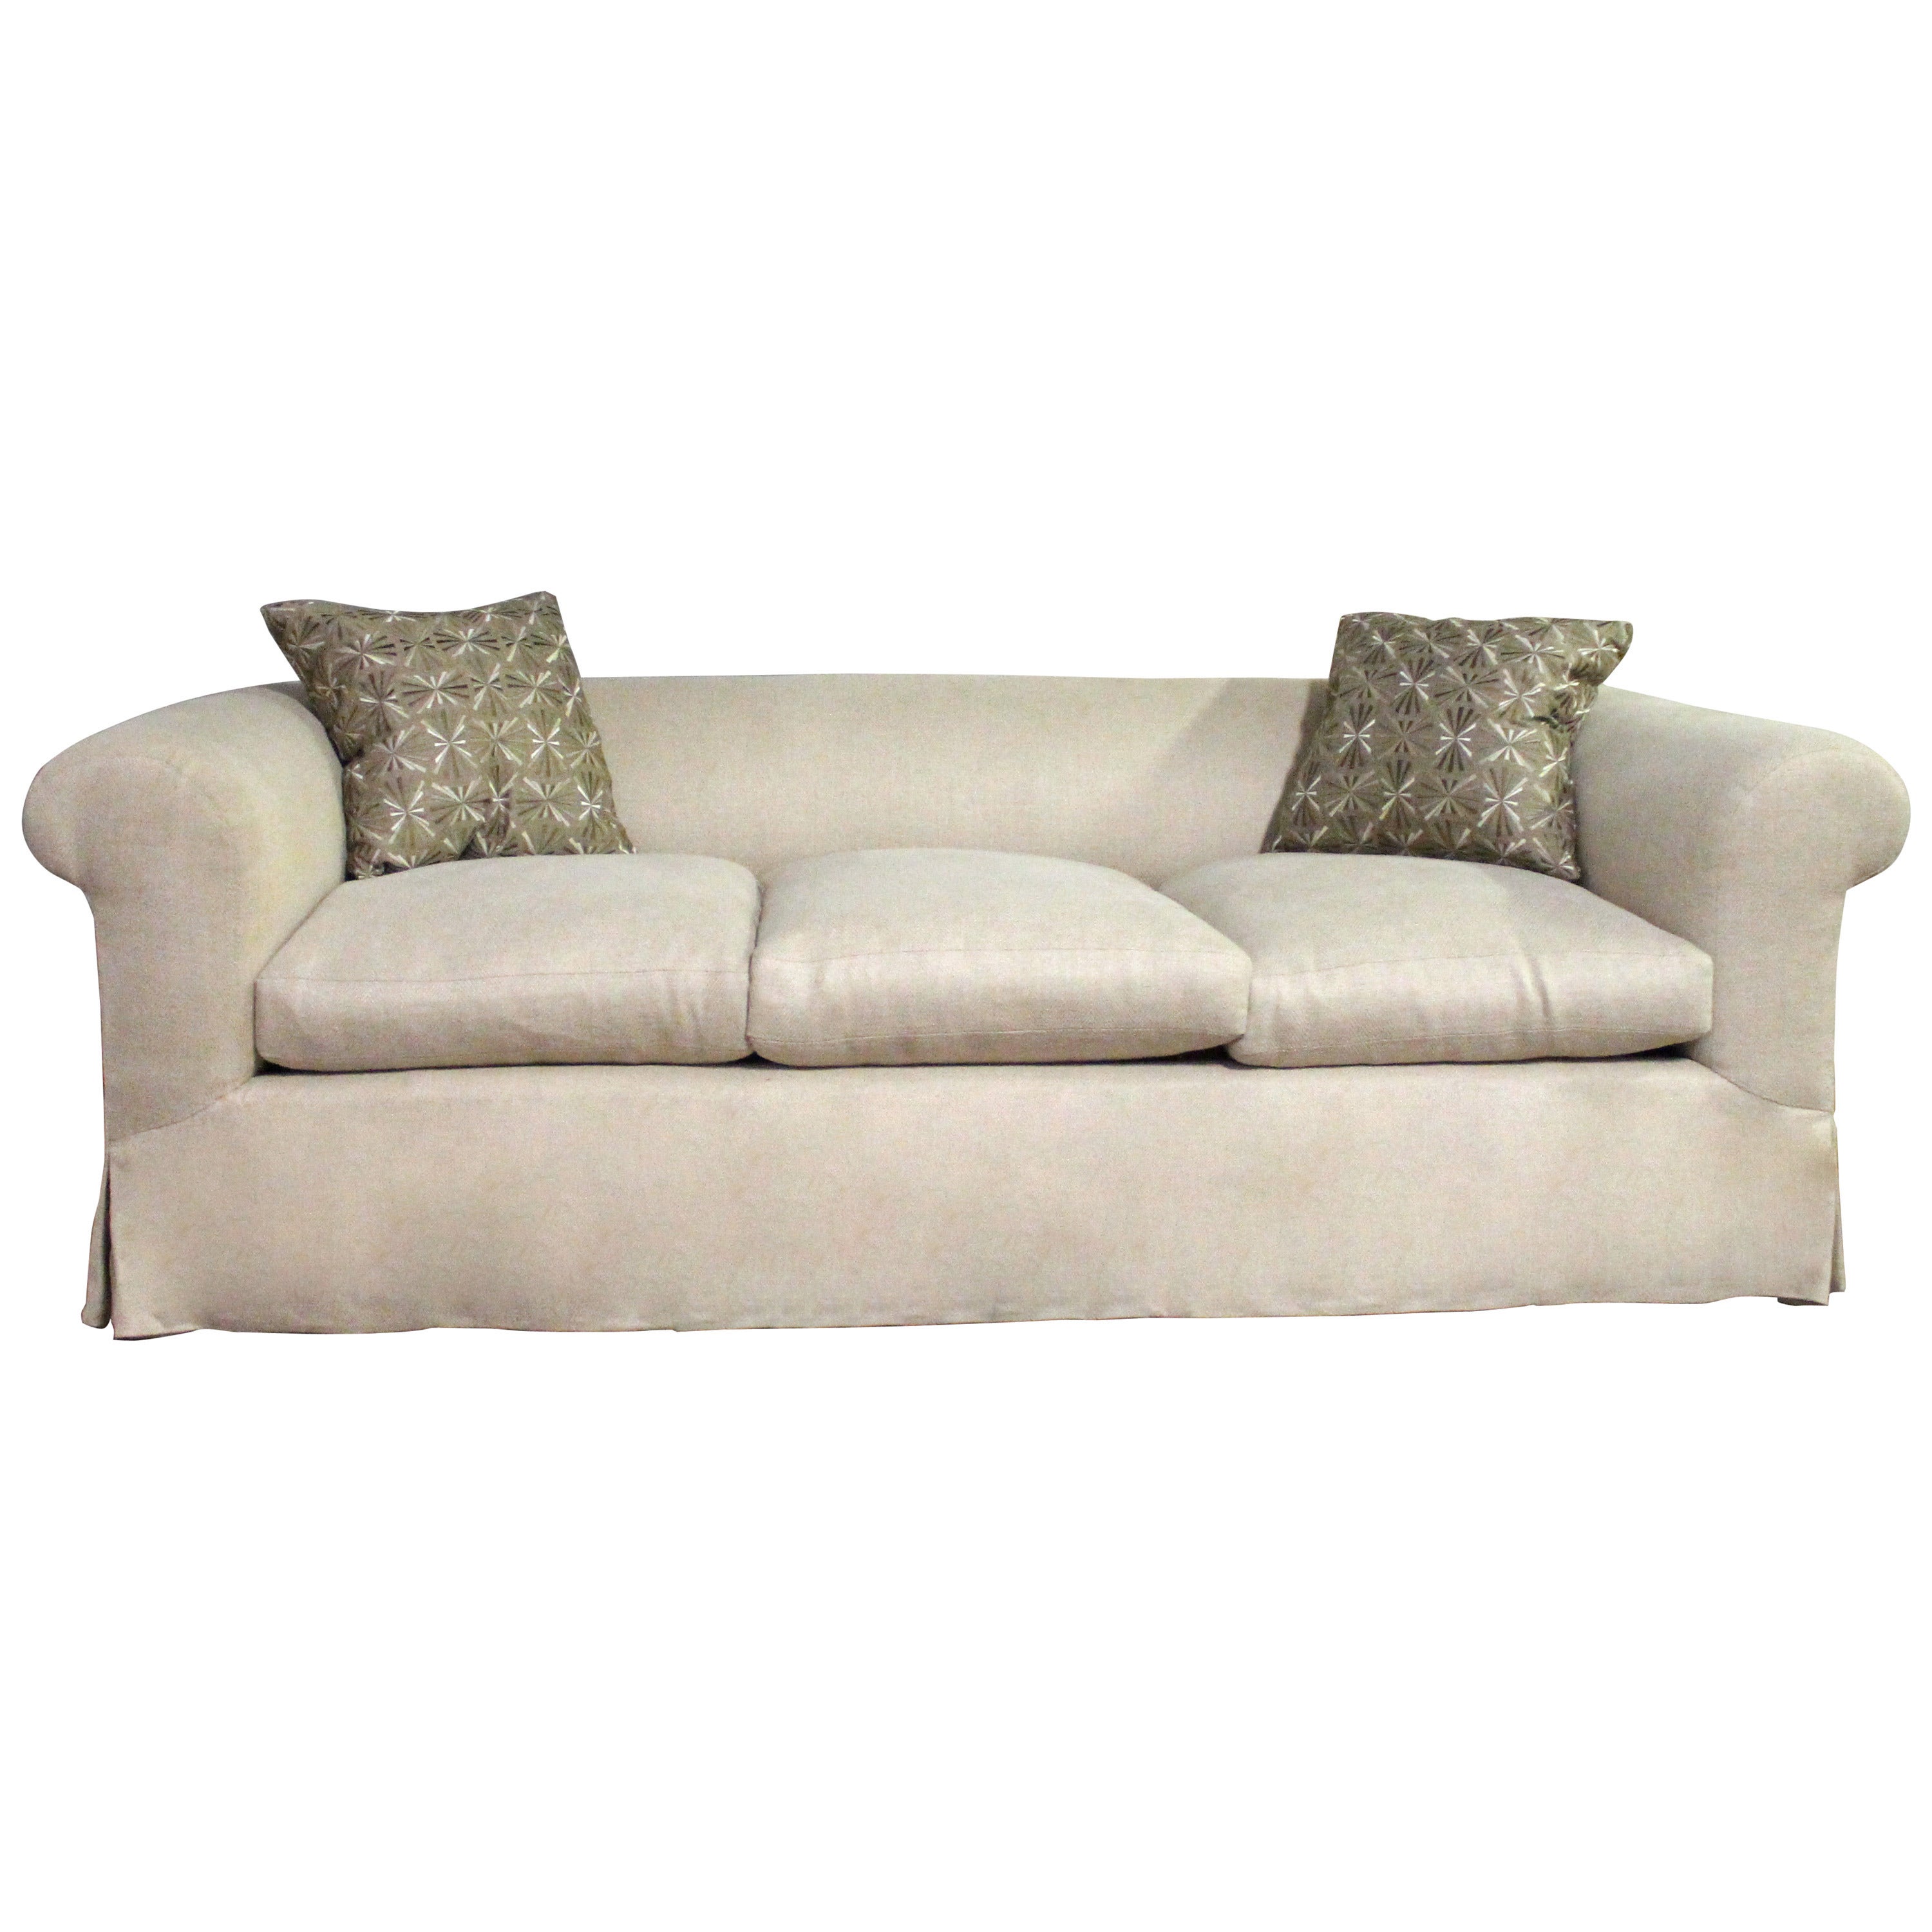 long, elegant and very comfortable rolled arm sofa in Oatmeal linen